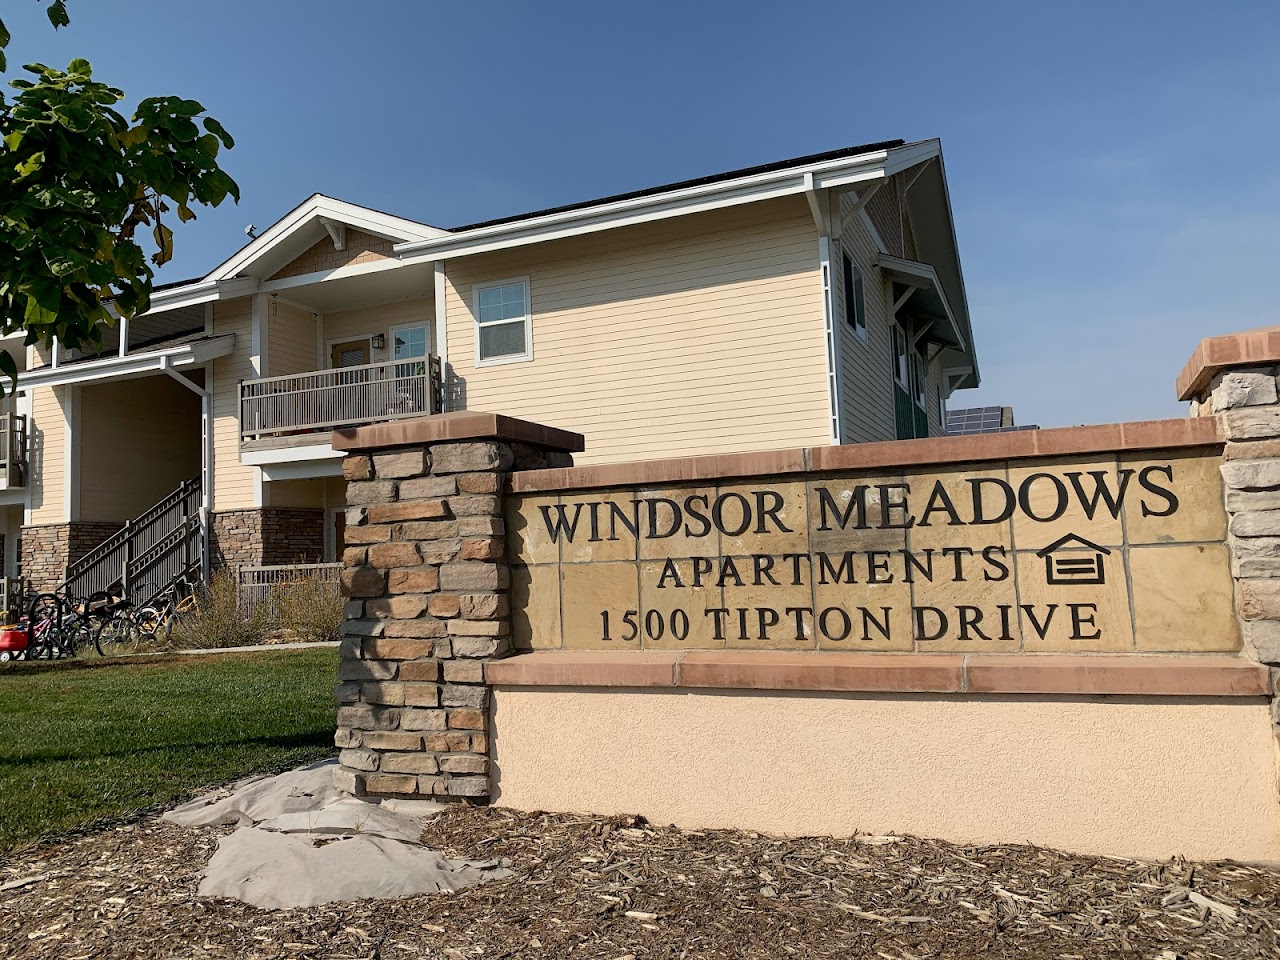 Photo of WINDSOR MEADOWS APARTMENTS PHASE II. Affordable housing located at 1500 TIPTON DRIVE WINDSOR, CO 80550